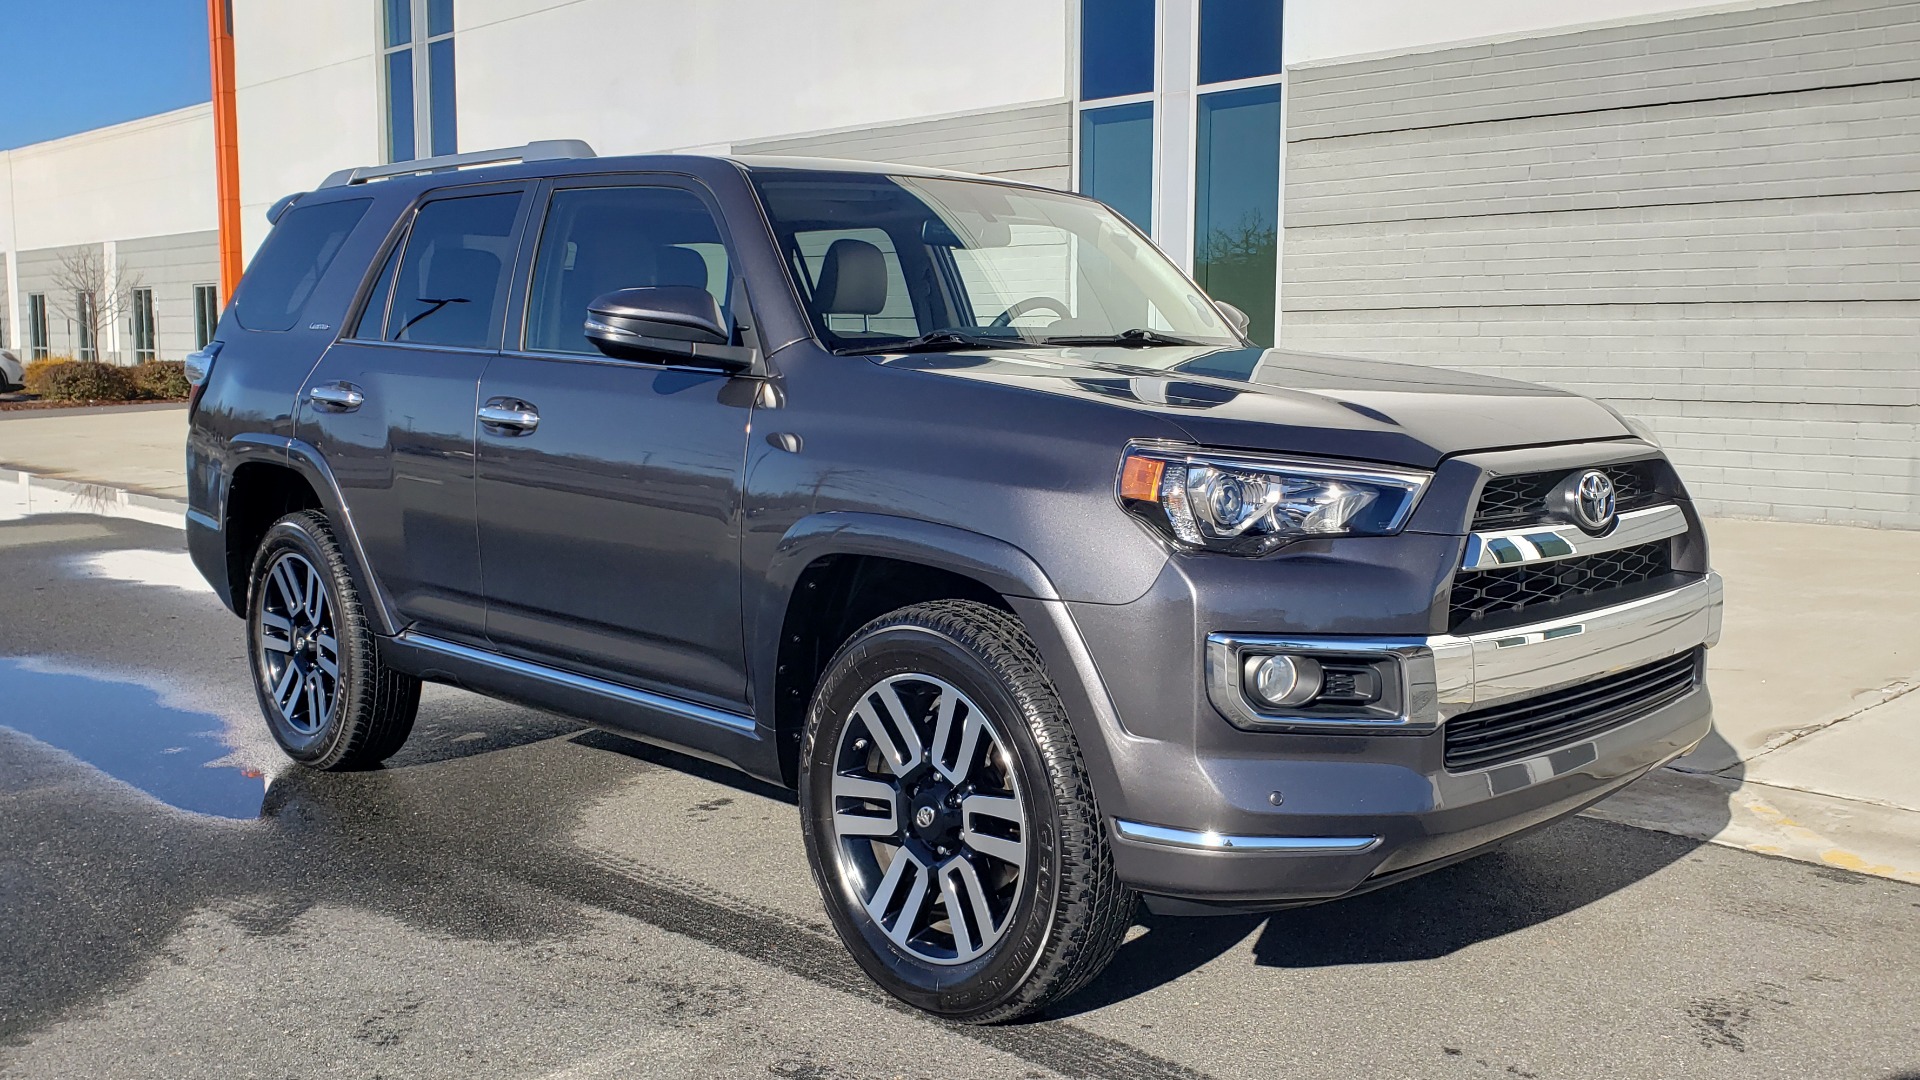 Used 2018 Toyota 4RUNNER LIMITED 4X4 / 4.0 V6 / AUTO / NAV / SUNROOF / REARVIEW for sale Sold at Formula Imports in Charlotte NC 28227 5